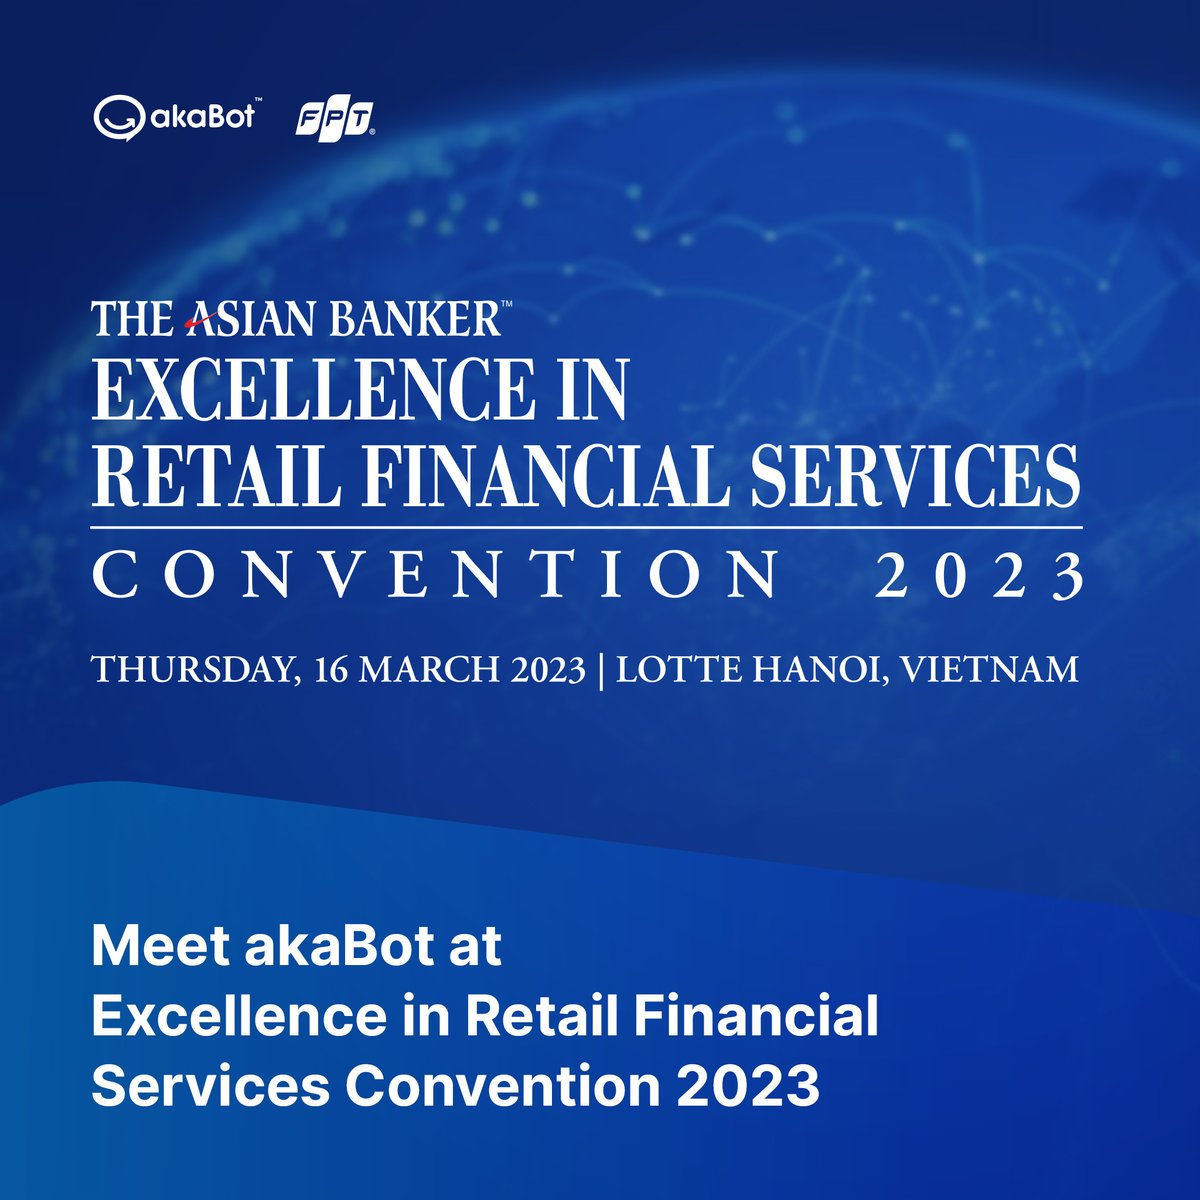 As the partner, akaBot will join @TheAsianBanker  Excellence in Retail Financial Services Convention 2023 and join discussions on #digitaltransformation journey, #customerexperience, open banking, and embedded finance at the event.
 
See you on 16 Mar in Hanoi!
#akaBot #RPA